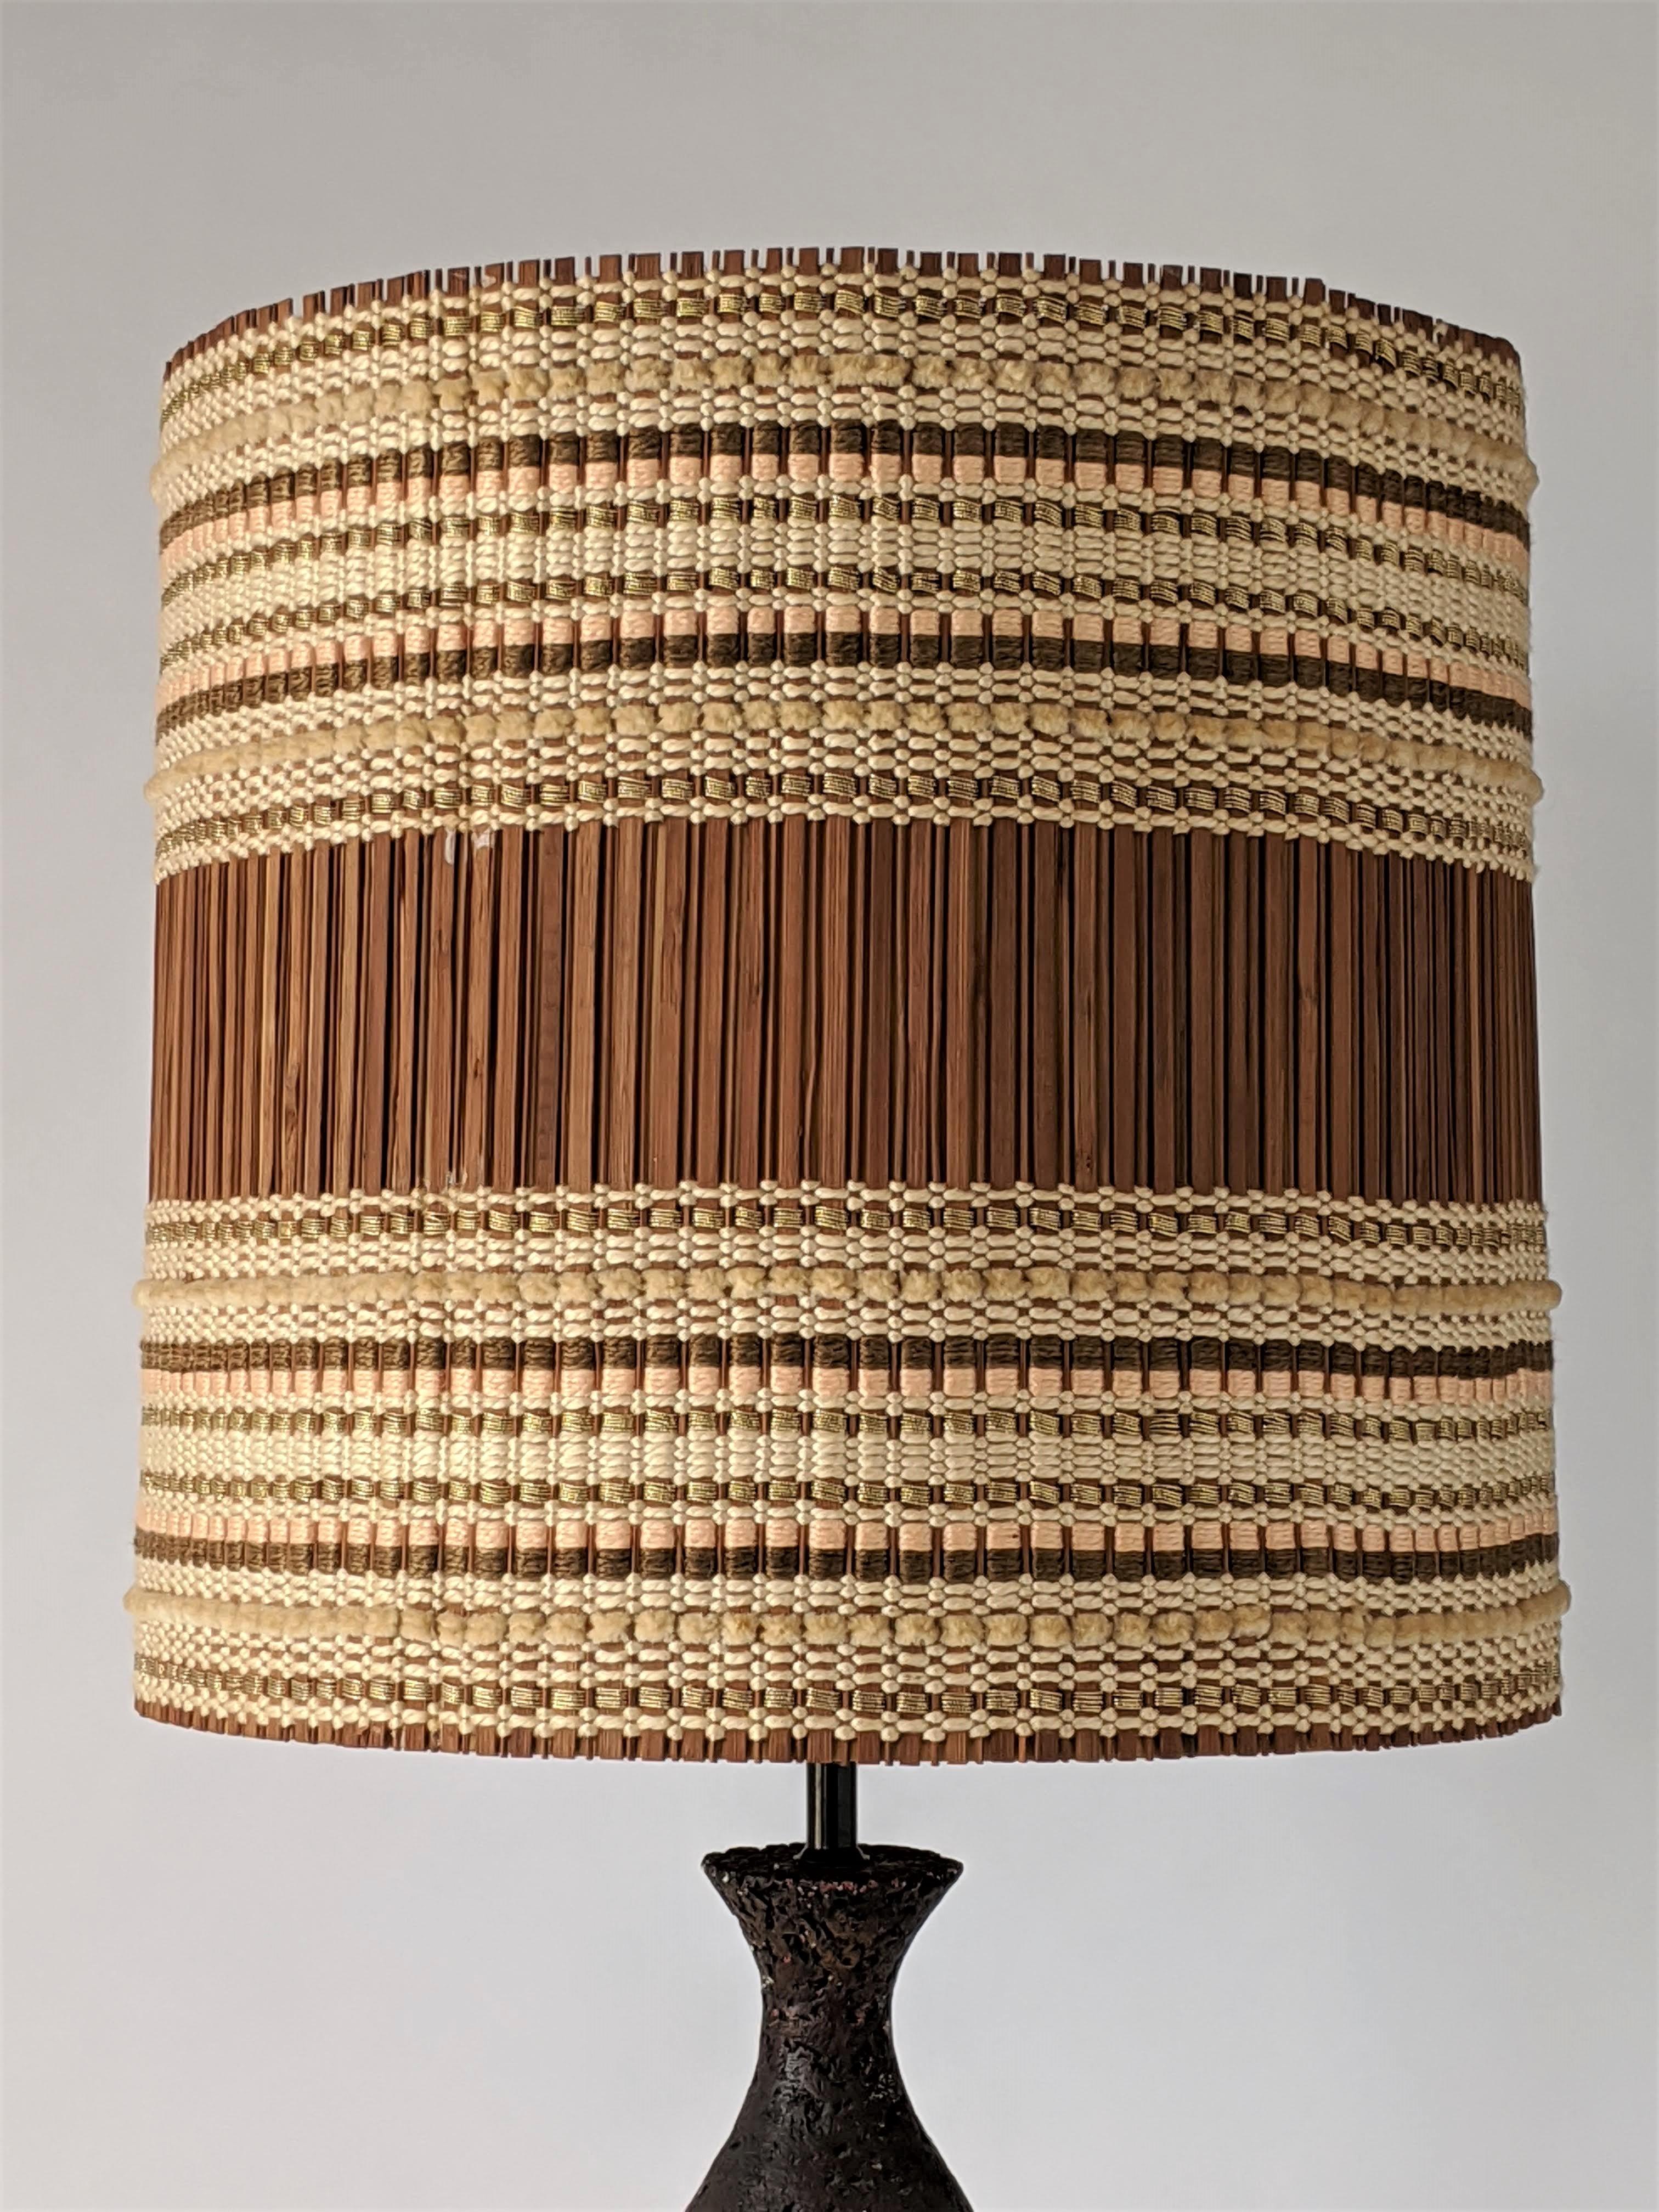 Maria Kipp chenille woven shade sitting on a well assorted US made chalkware table lamp by Quartite Creative Corp. 

Shade measure 17 in. wide by 16 in. high. 

Contain one E26 size socket rated at 100 watt. 

Switch on socket.
 